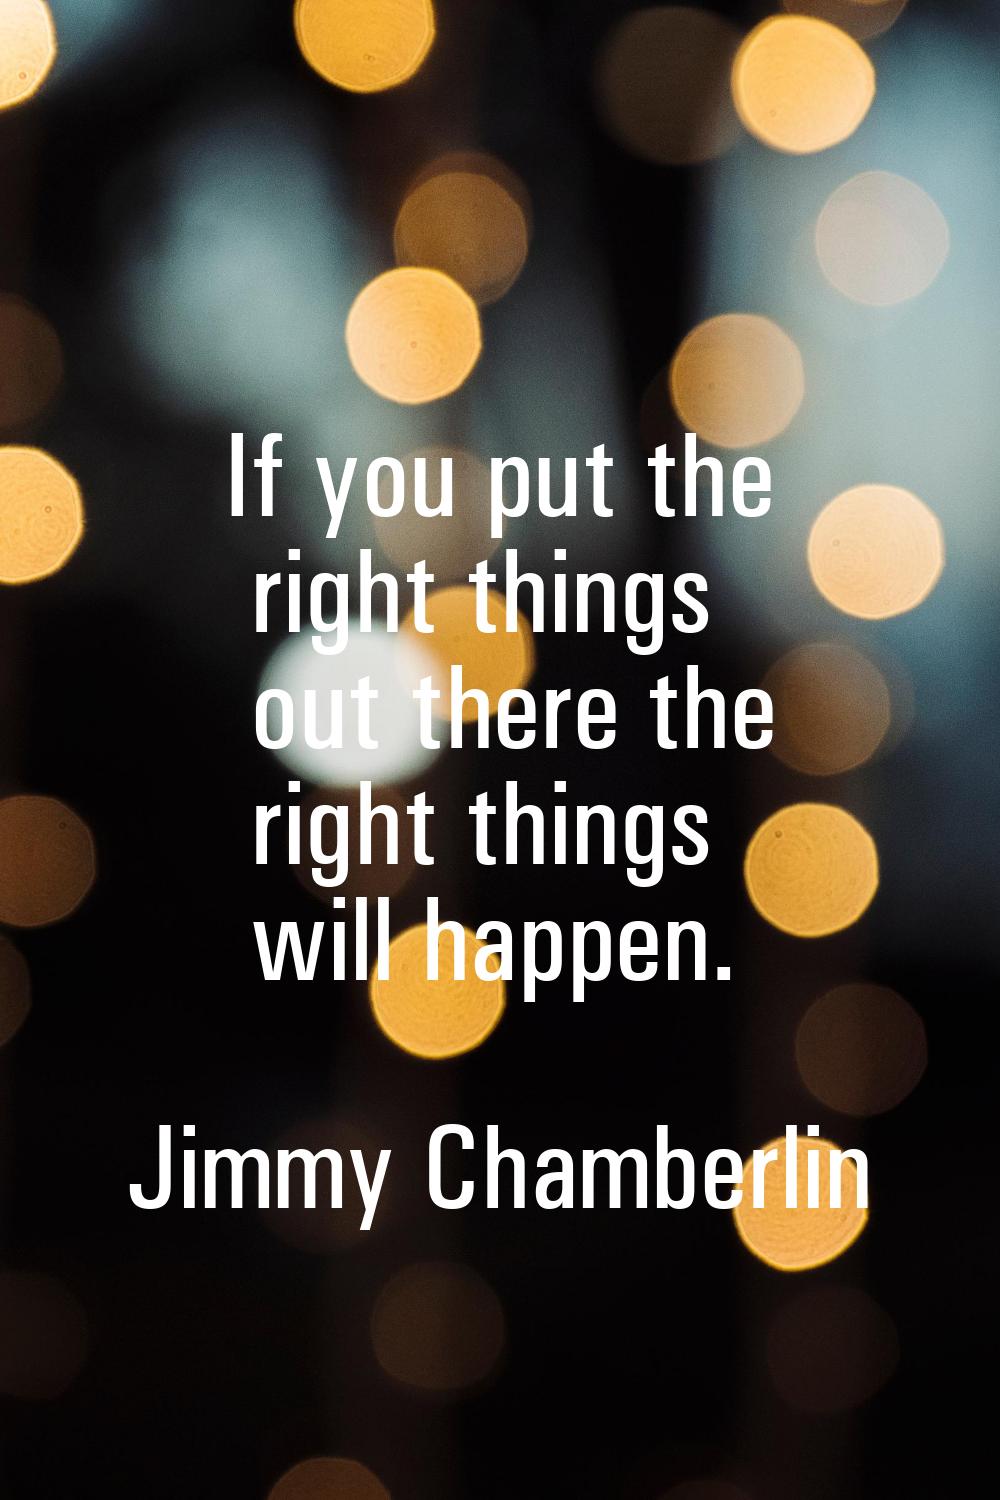 If you put the right things out there the right things will happen.